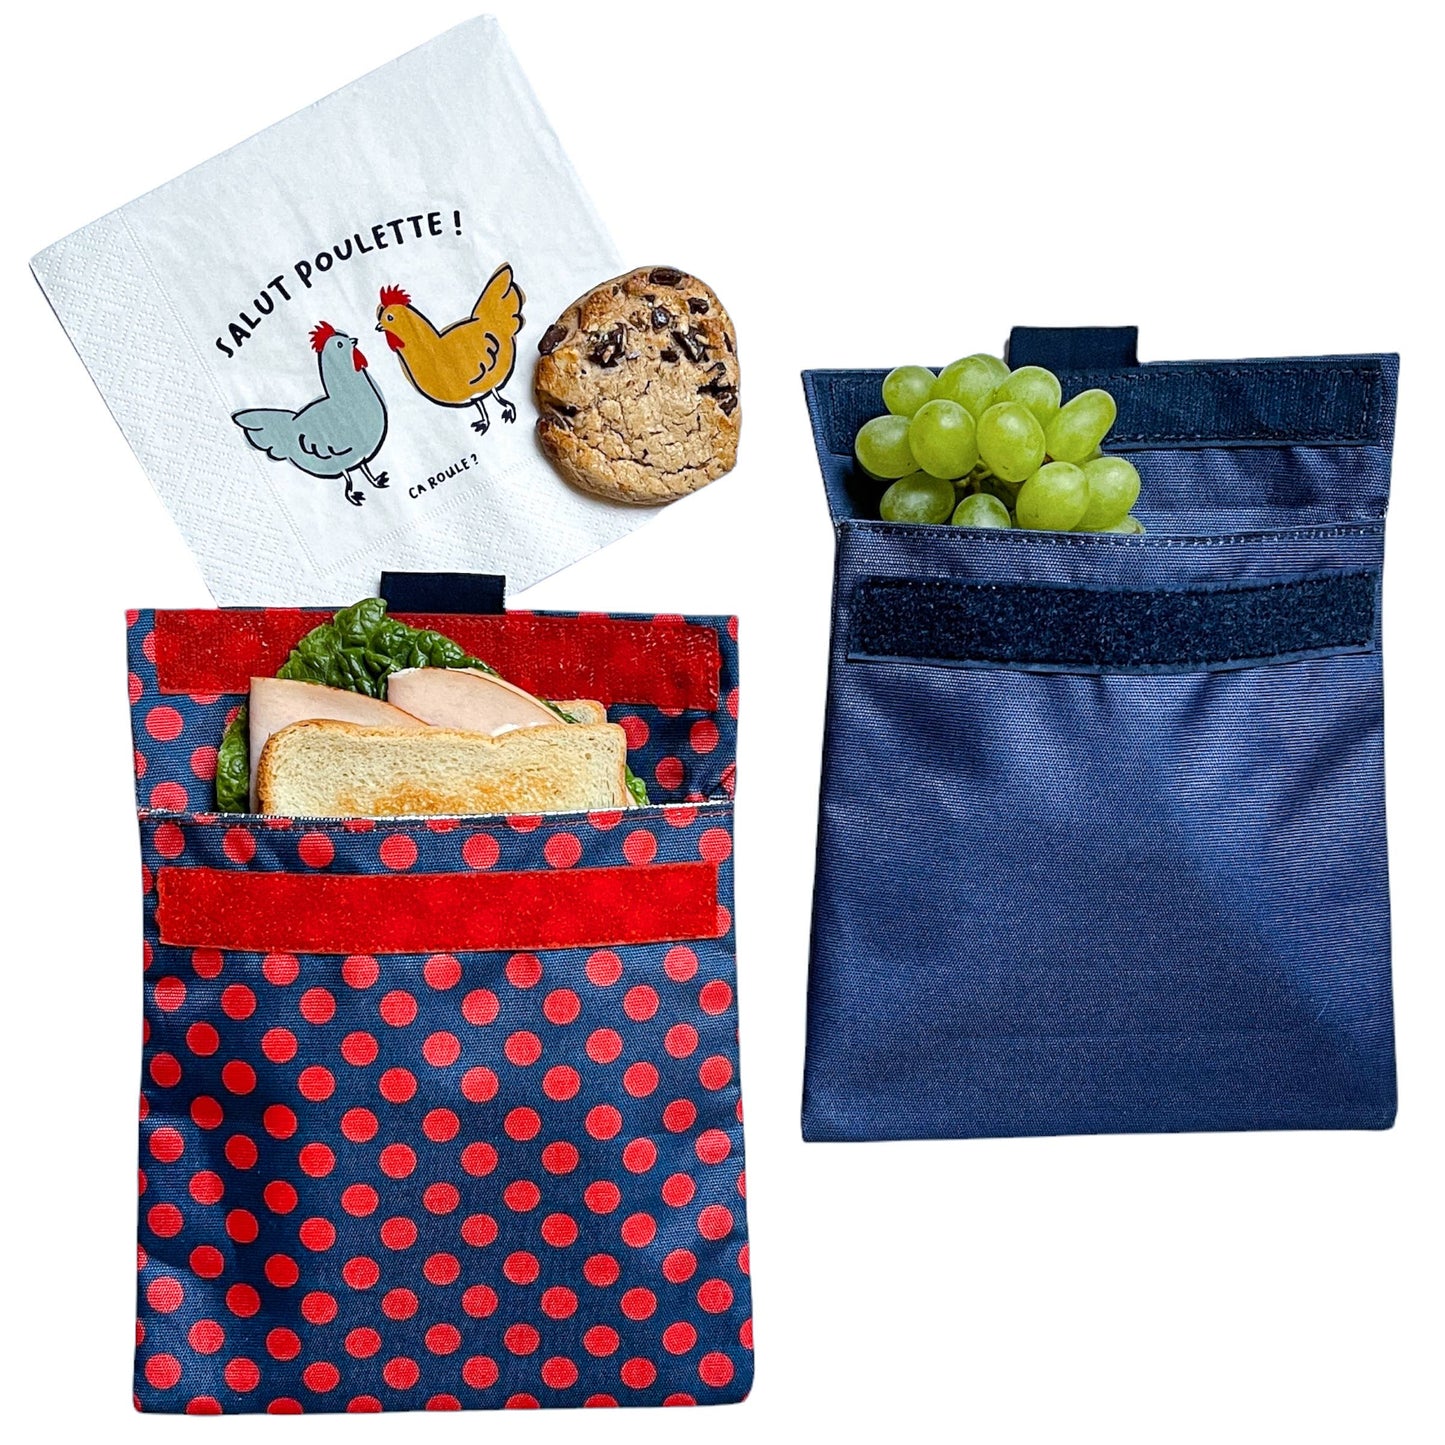 Reusable sandwich and snack bag.  velcro closure and insulated interior.  Durable material.  red polka dots on dark blue background.  wipe clean or throw in washing machine.